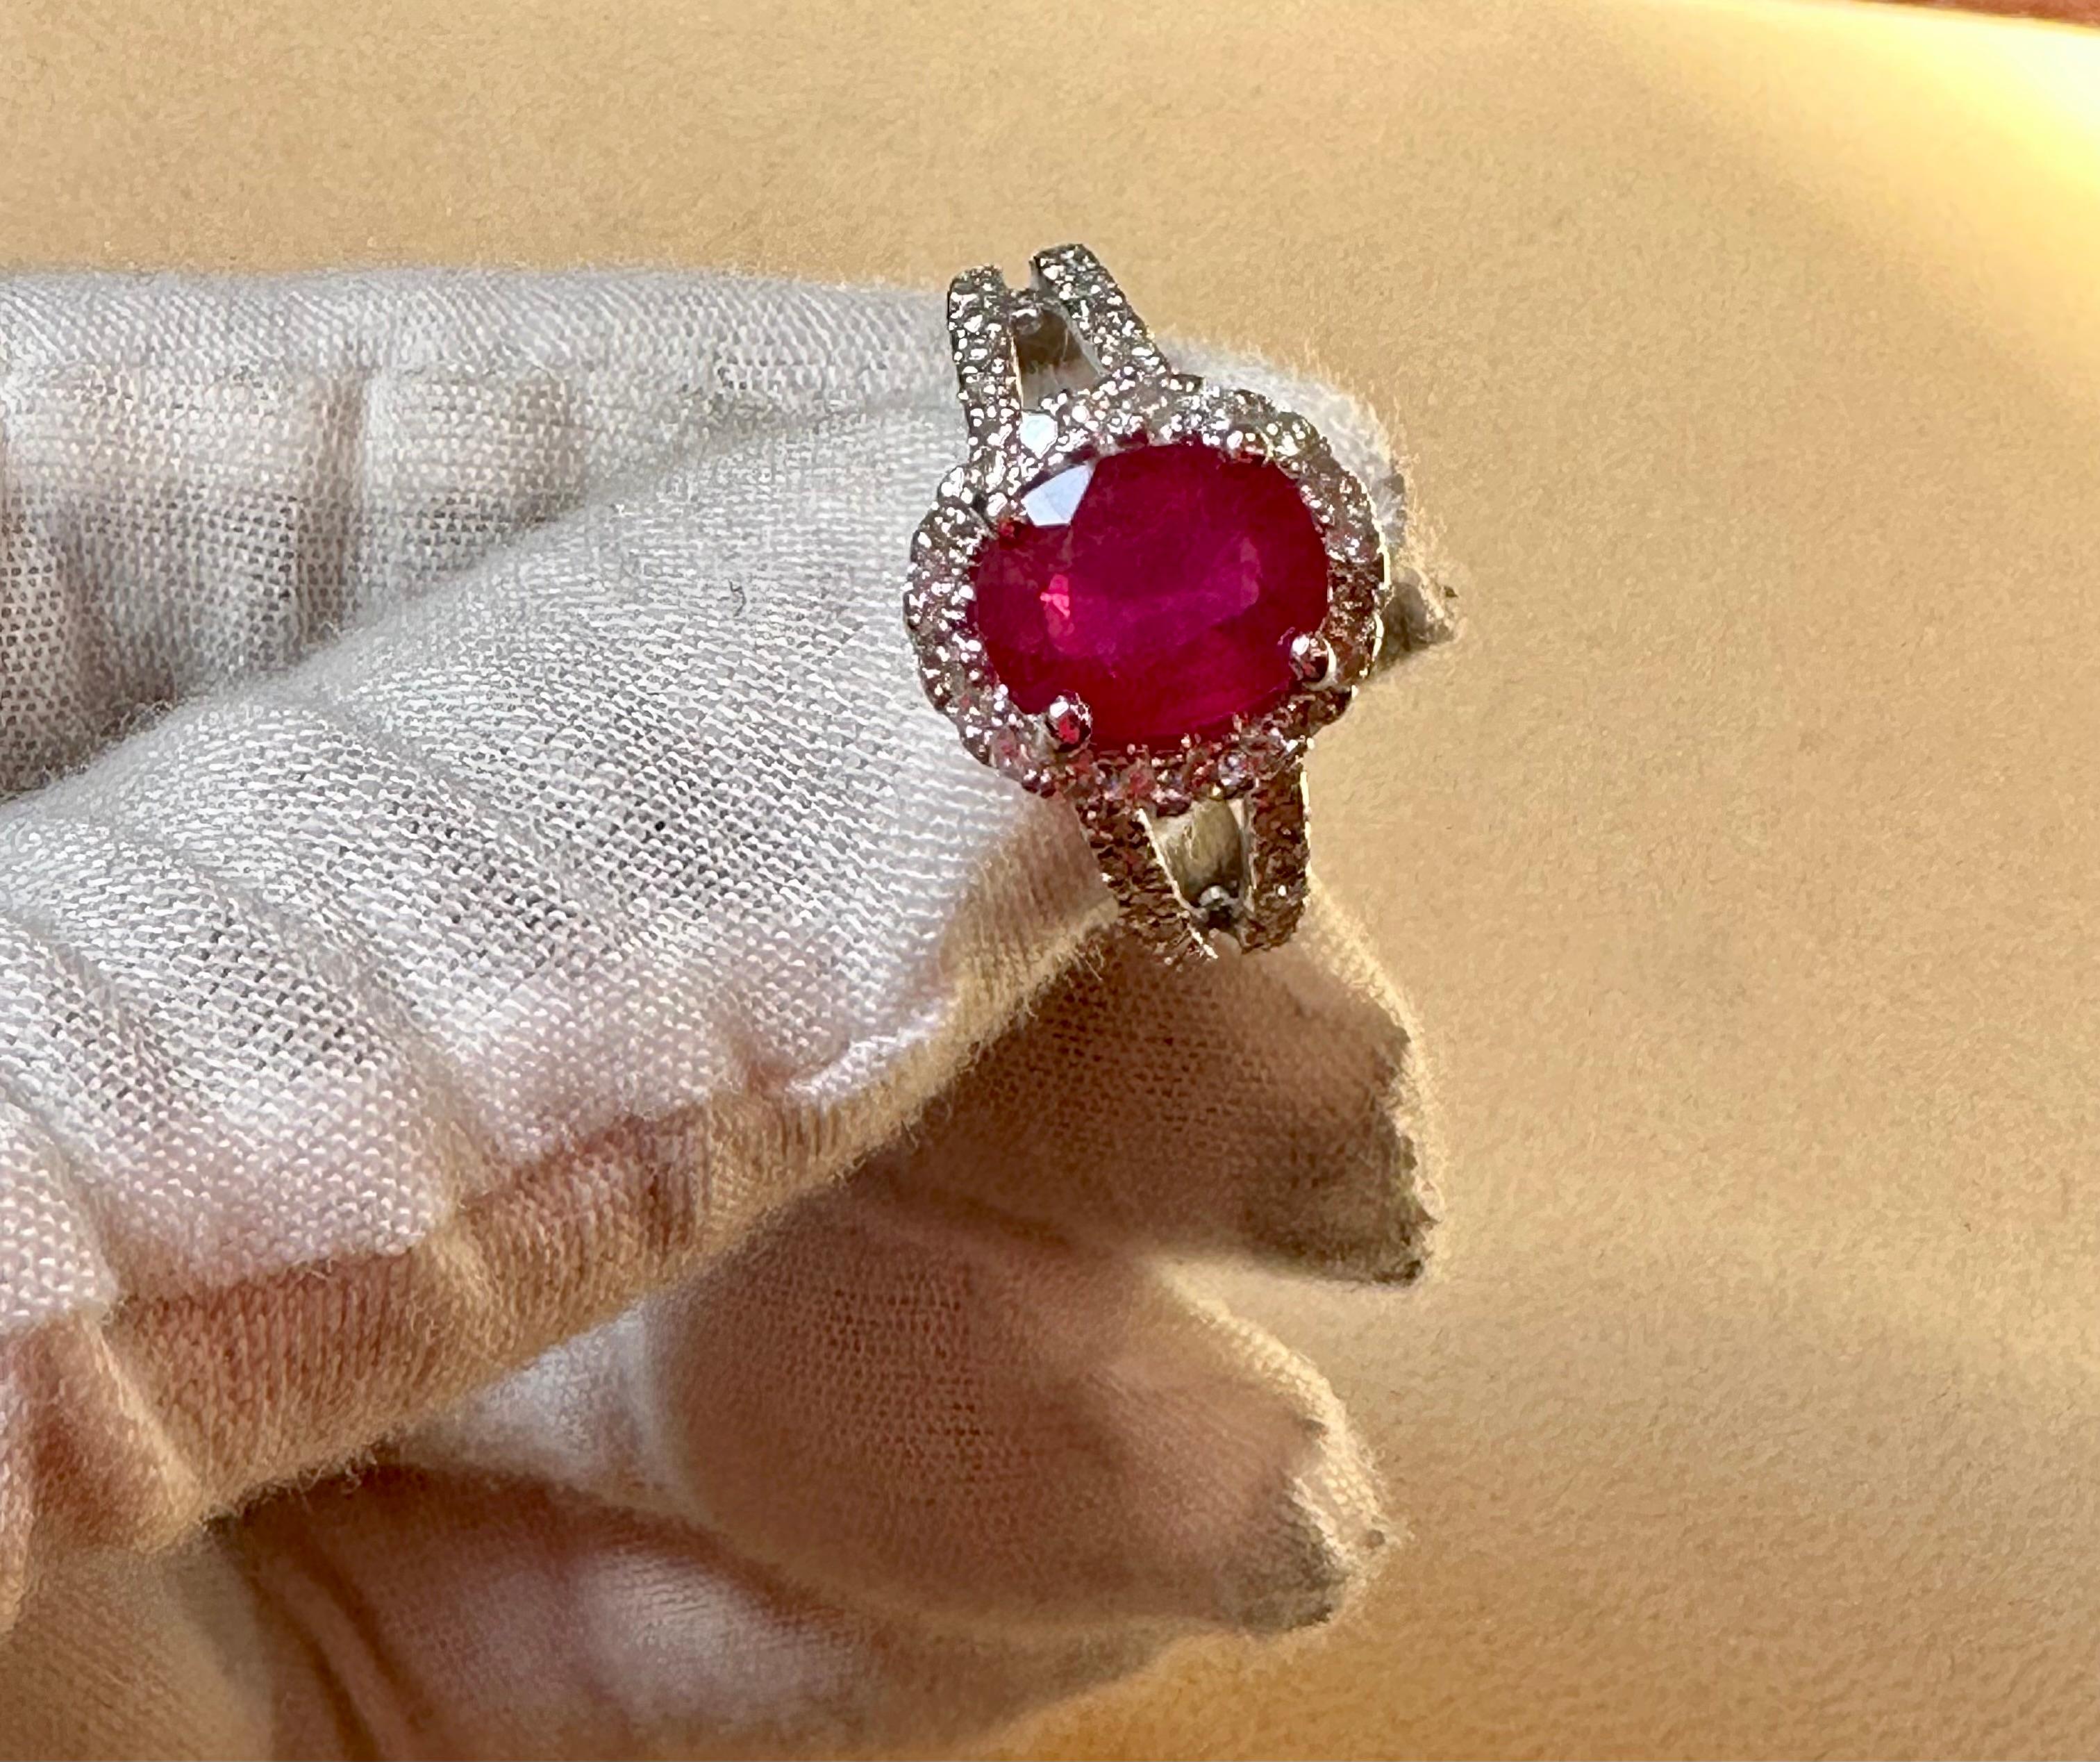 2.5 Carat Oval Treated Ruby & 2 ct Diamond Ring 14 Karat White Gold Size 7.25 For Sale 4